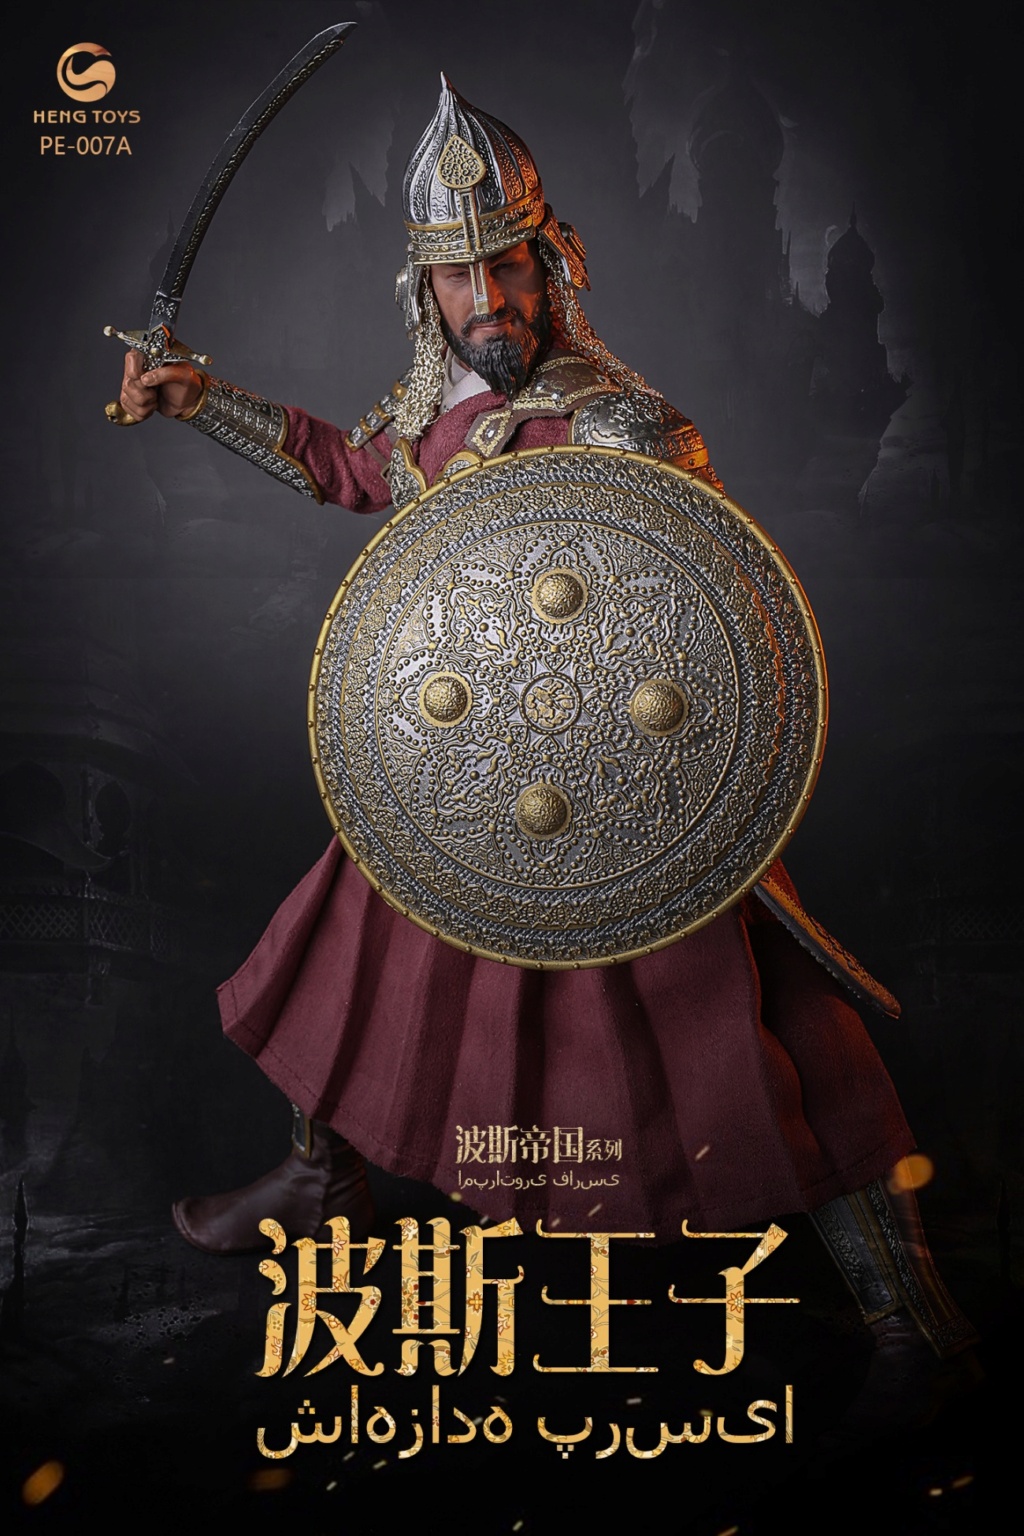 historical - NEW PRODUCT: HengToys: 1/6 Persian Empire Series-Prince of Persia [A & B Section] (#PE-007) 16032811